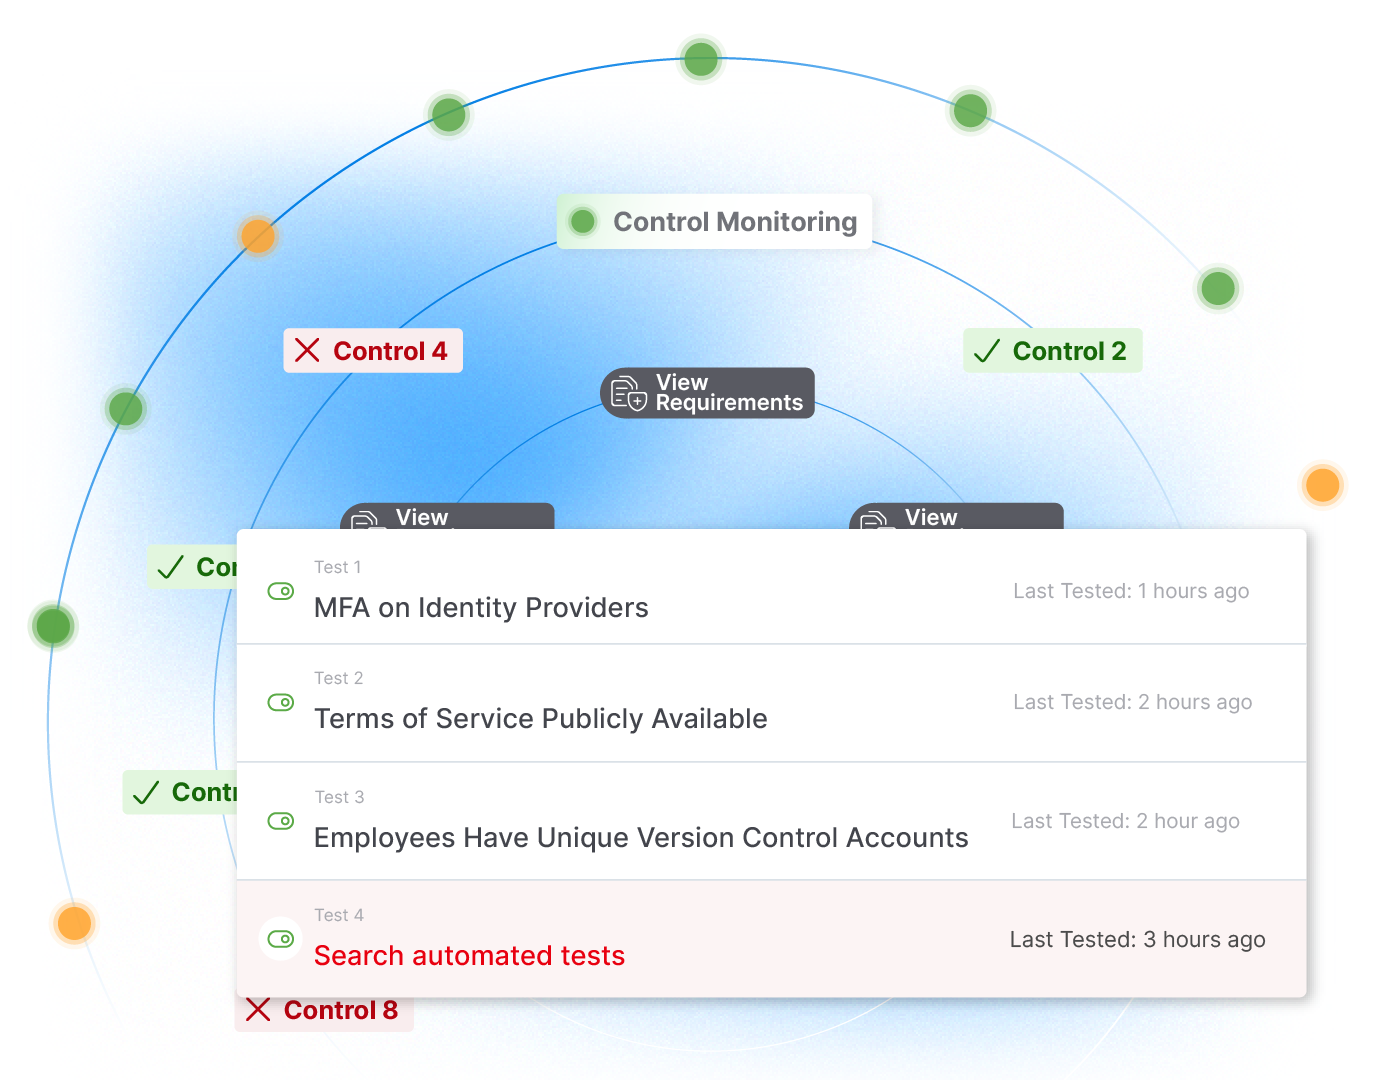 HIPAA - Continuous Control Monitoring to Protect Customer Privacy Image